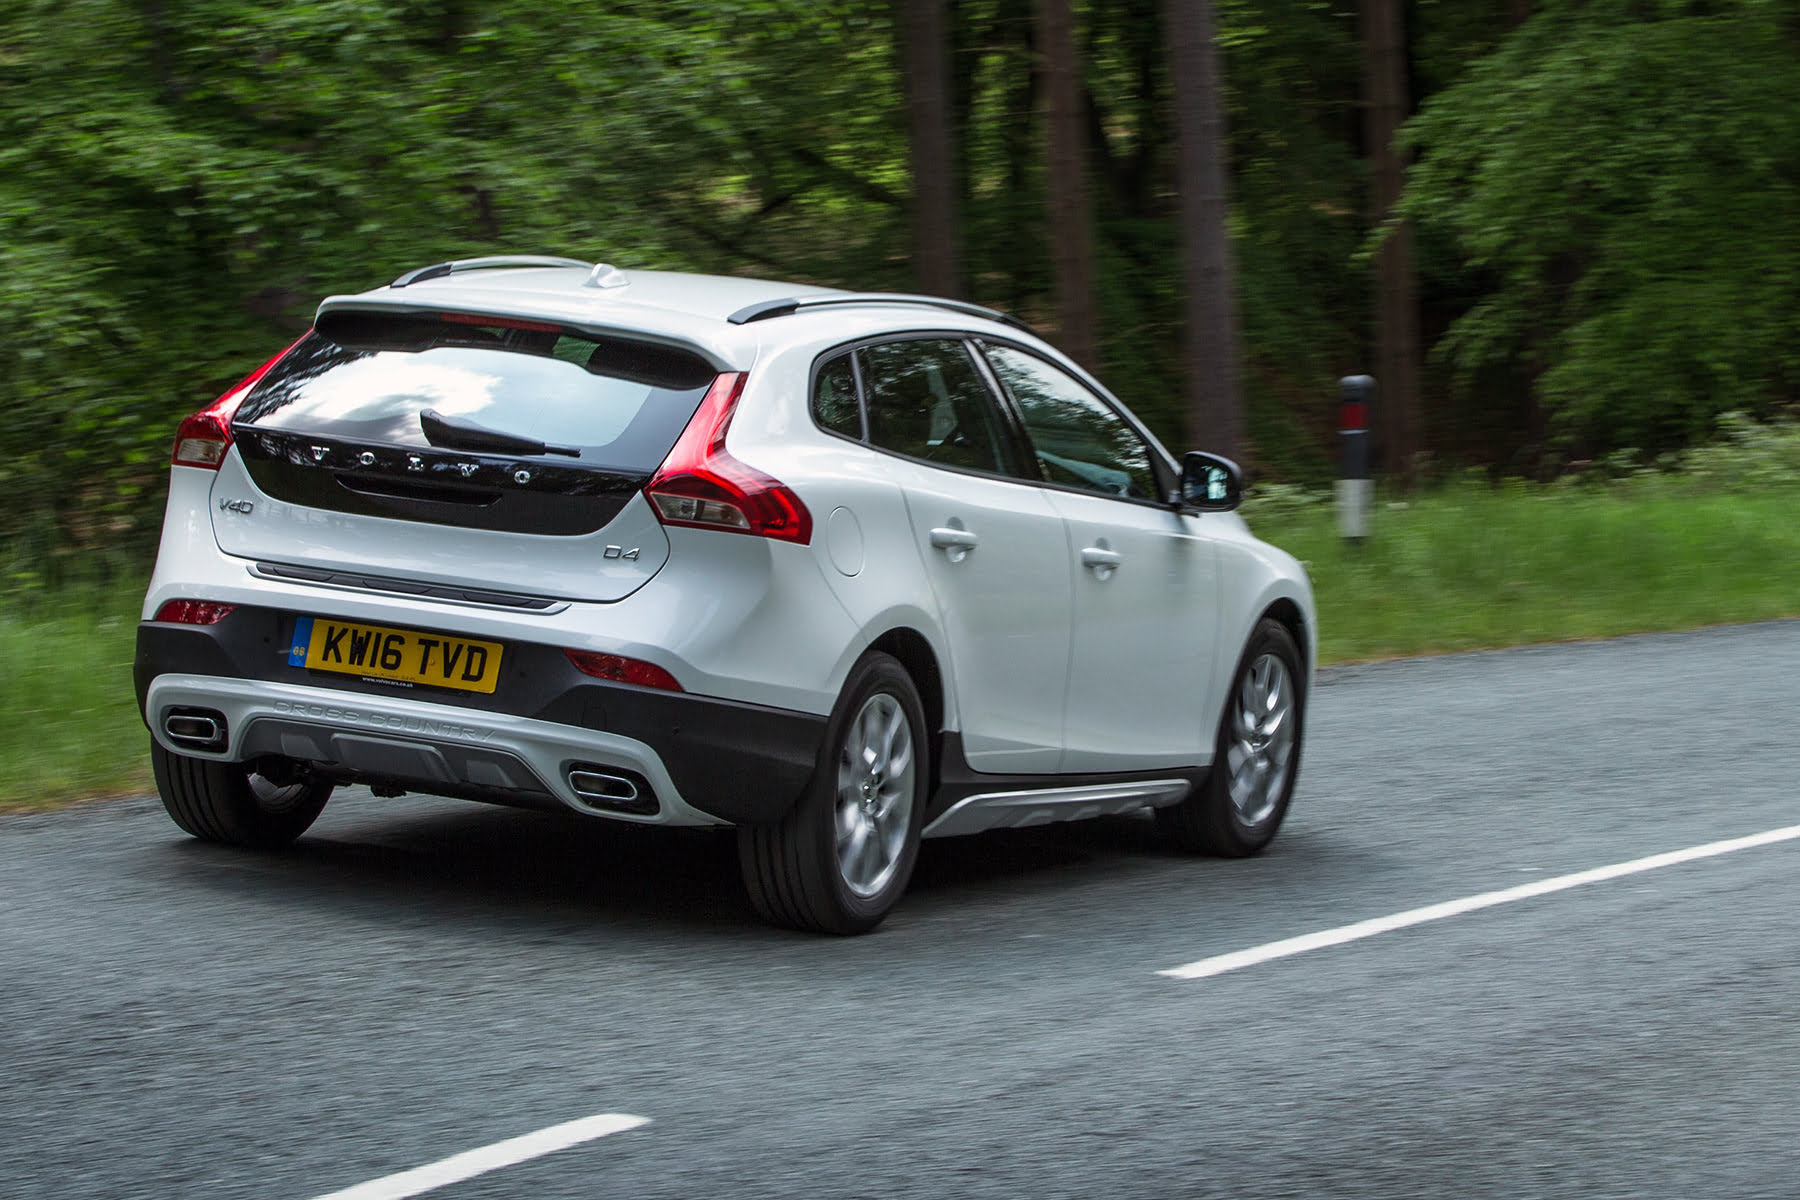 Volvo V40 Cross Country (2013 - 2019) rear view | Expert Rating 